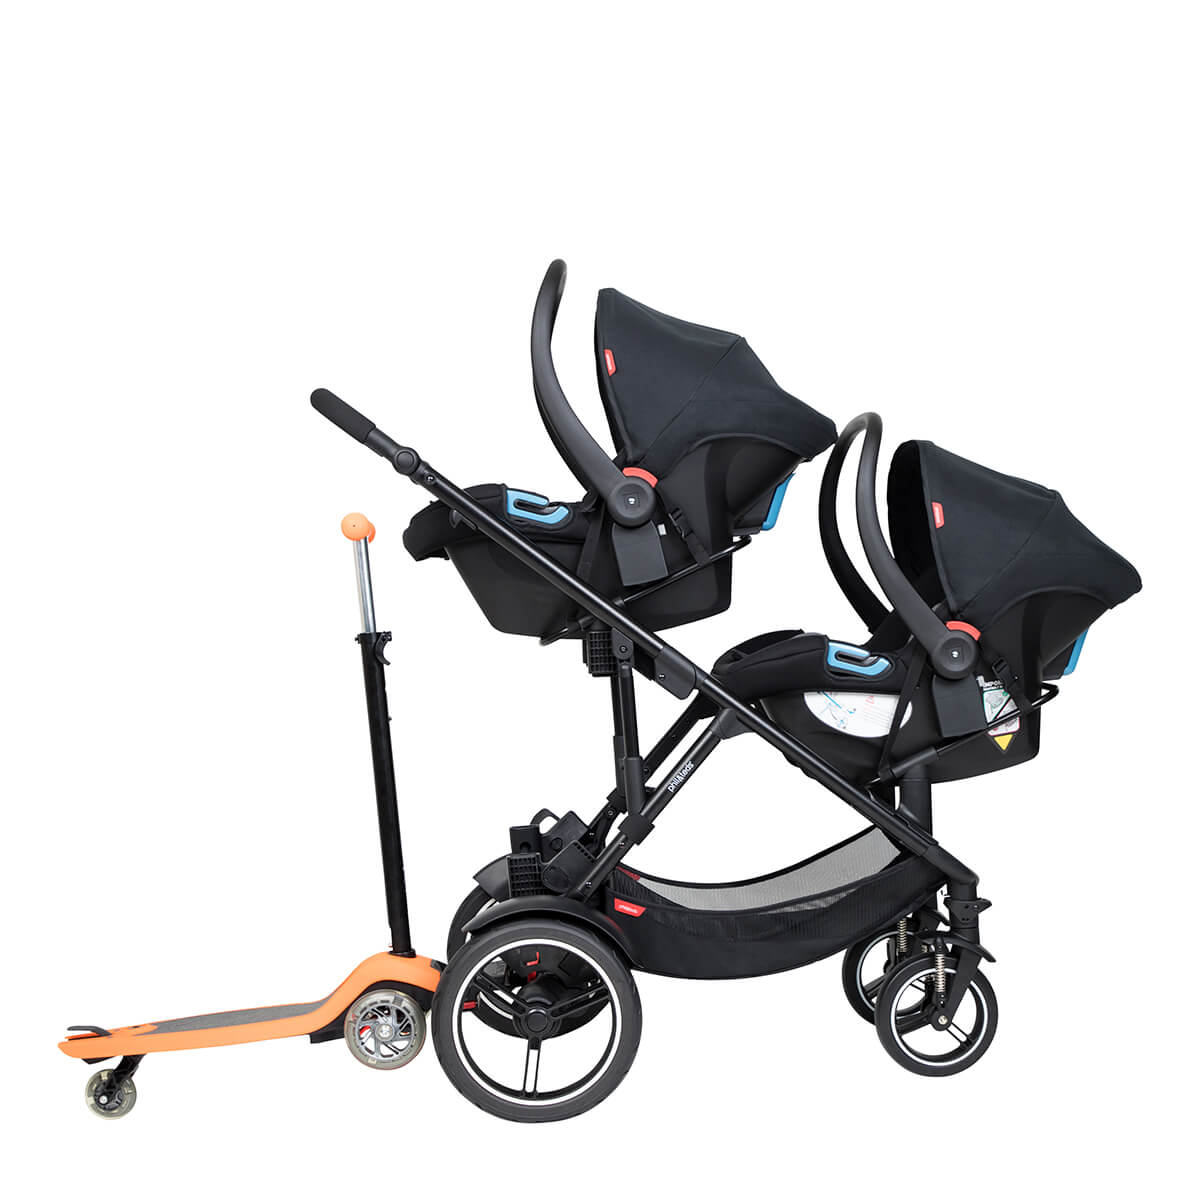 https://cdn.accentuate.io/4394653778008/19272835367000/philteds-voyager-poussette-with-double-travel-systems-and-freerider-stroller-board-in-the-rear-v1626484570974.jpg?1200x1200